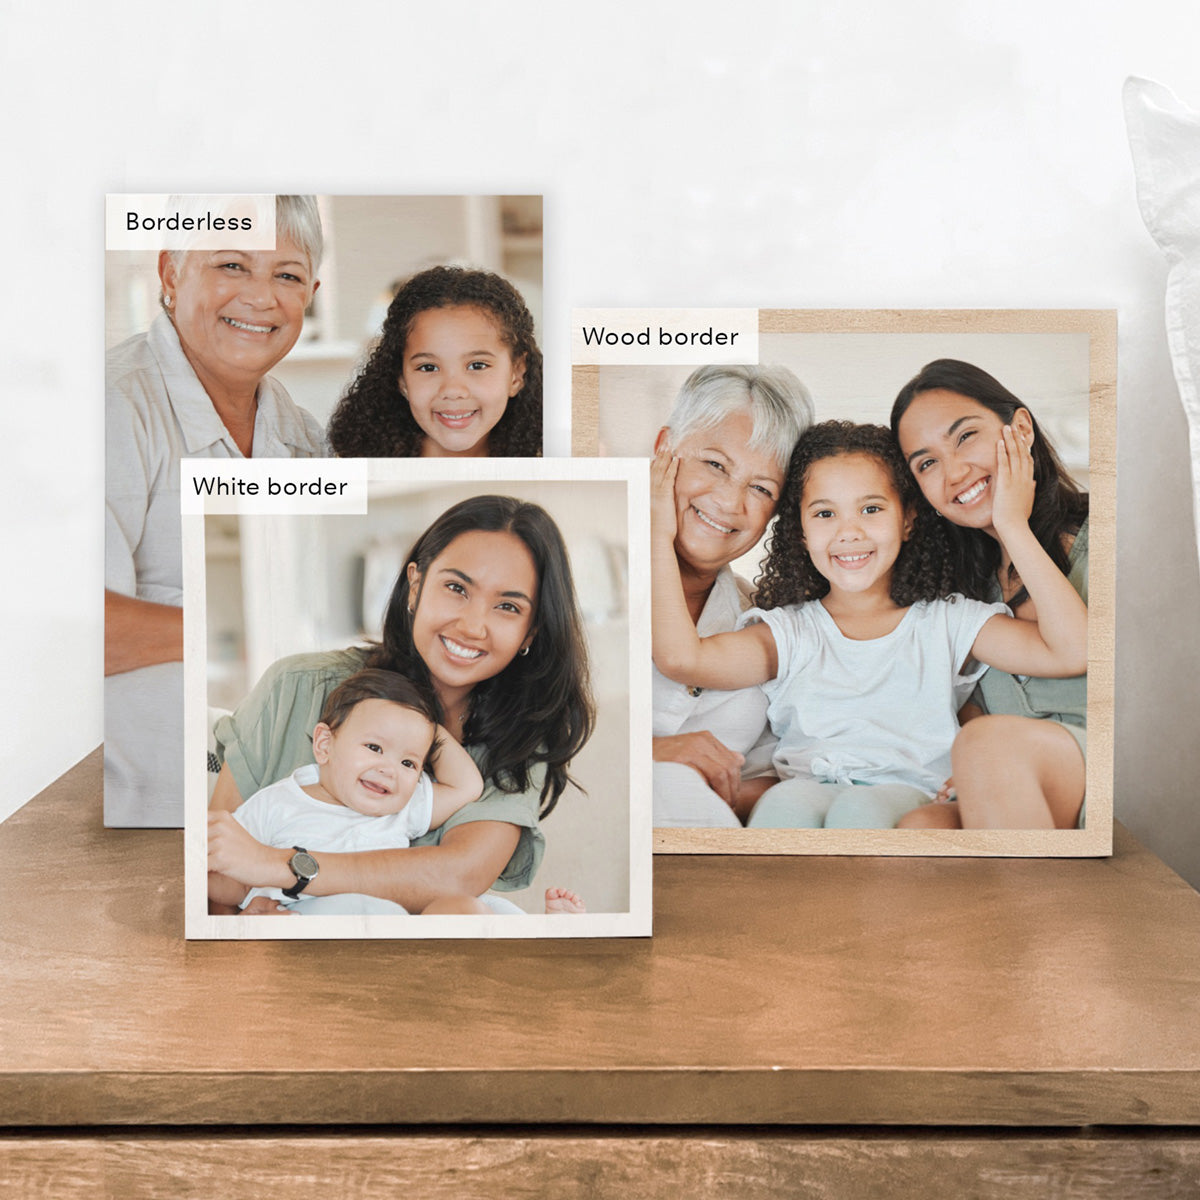 Premium Wooden Photo Block - Standing on a Table, Showing all Border Options to choose from